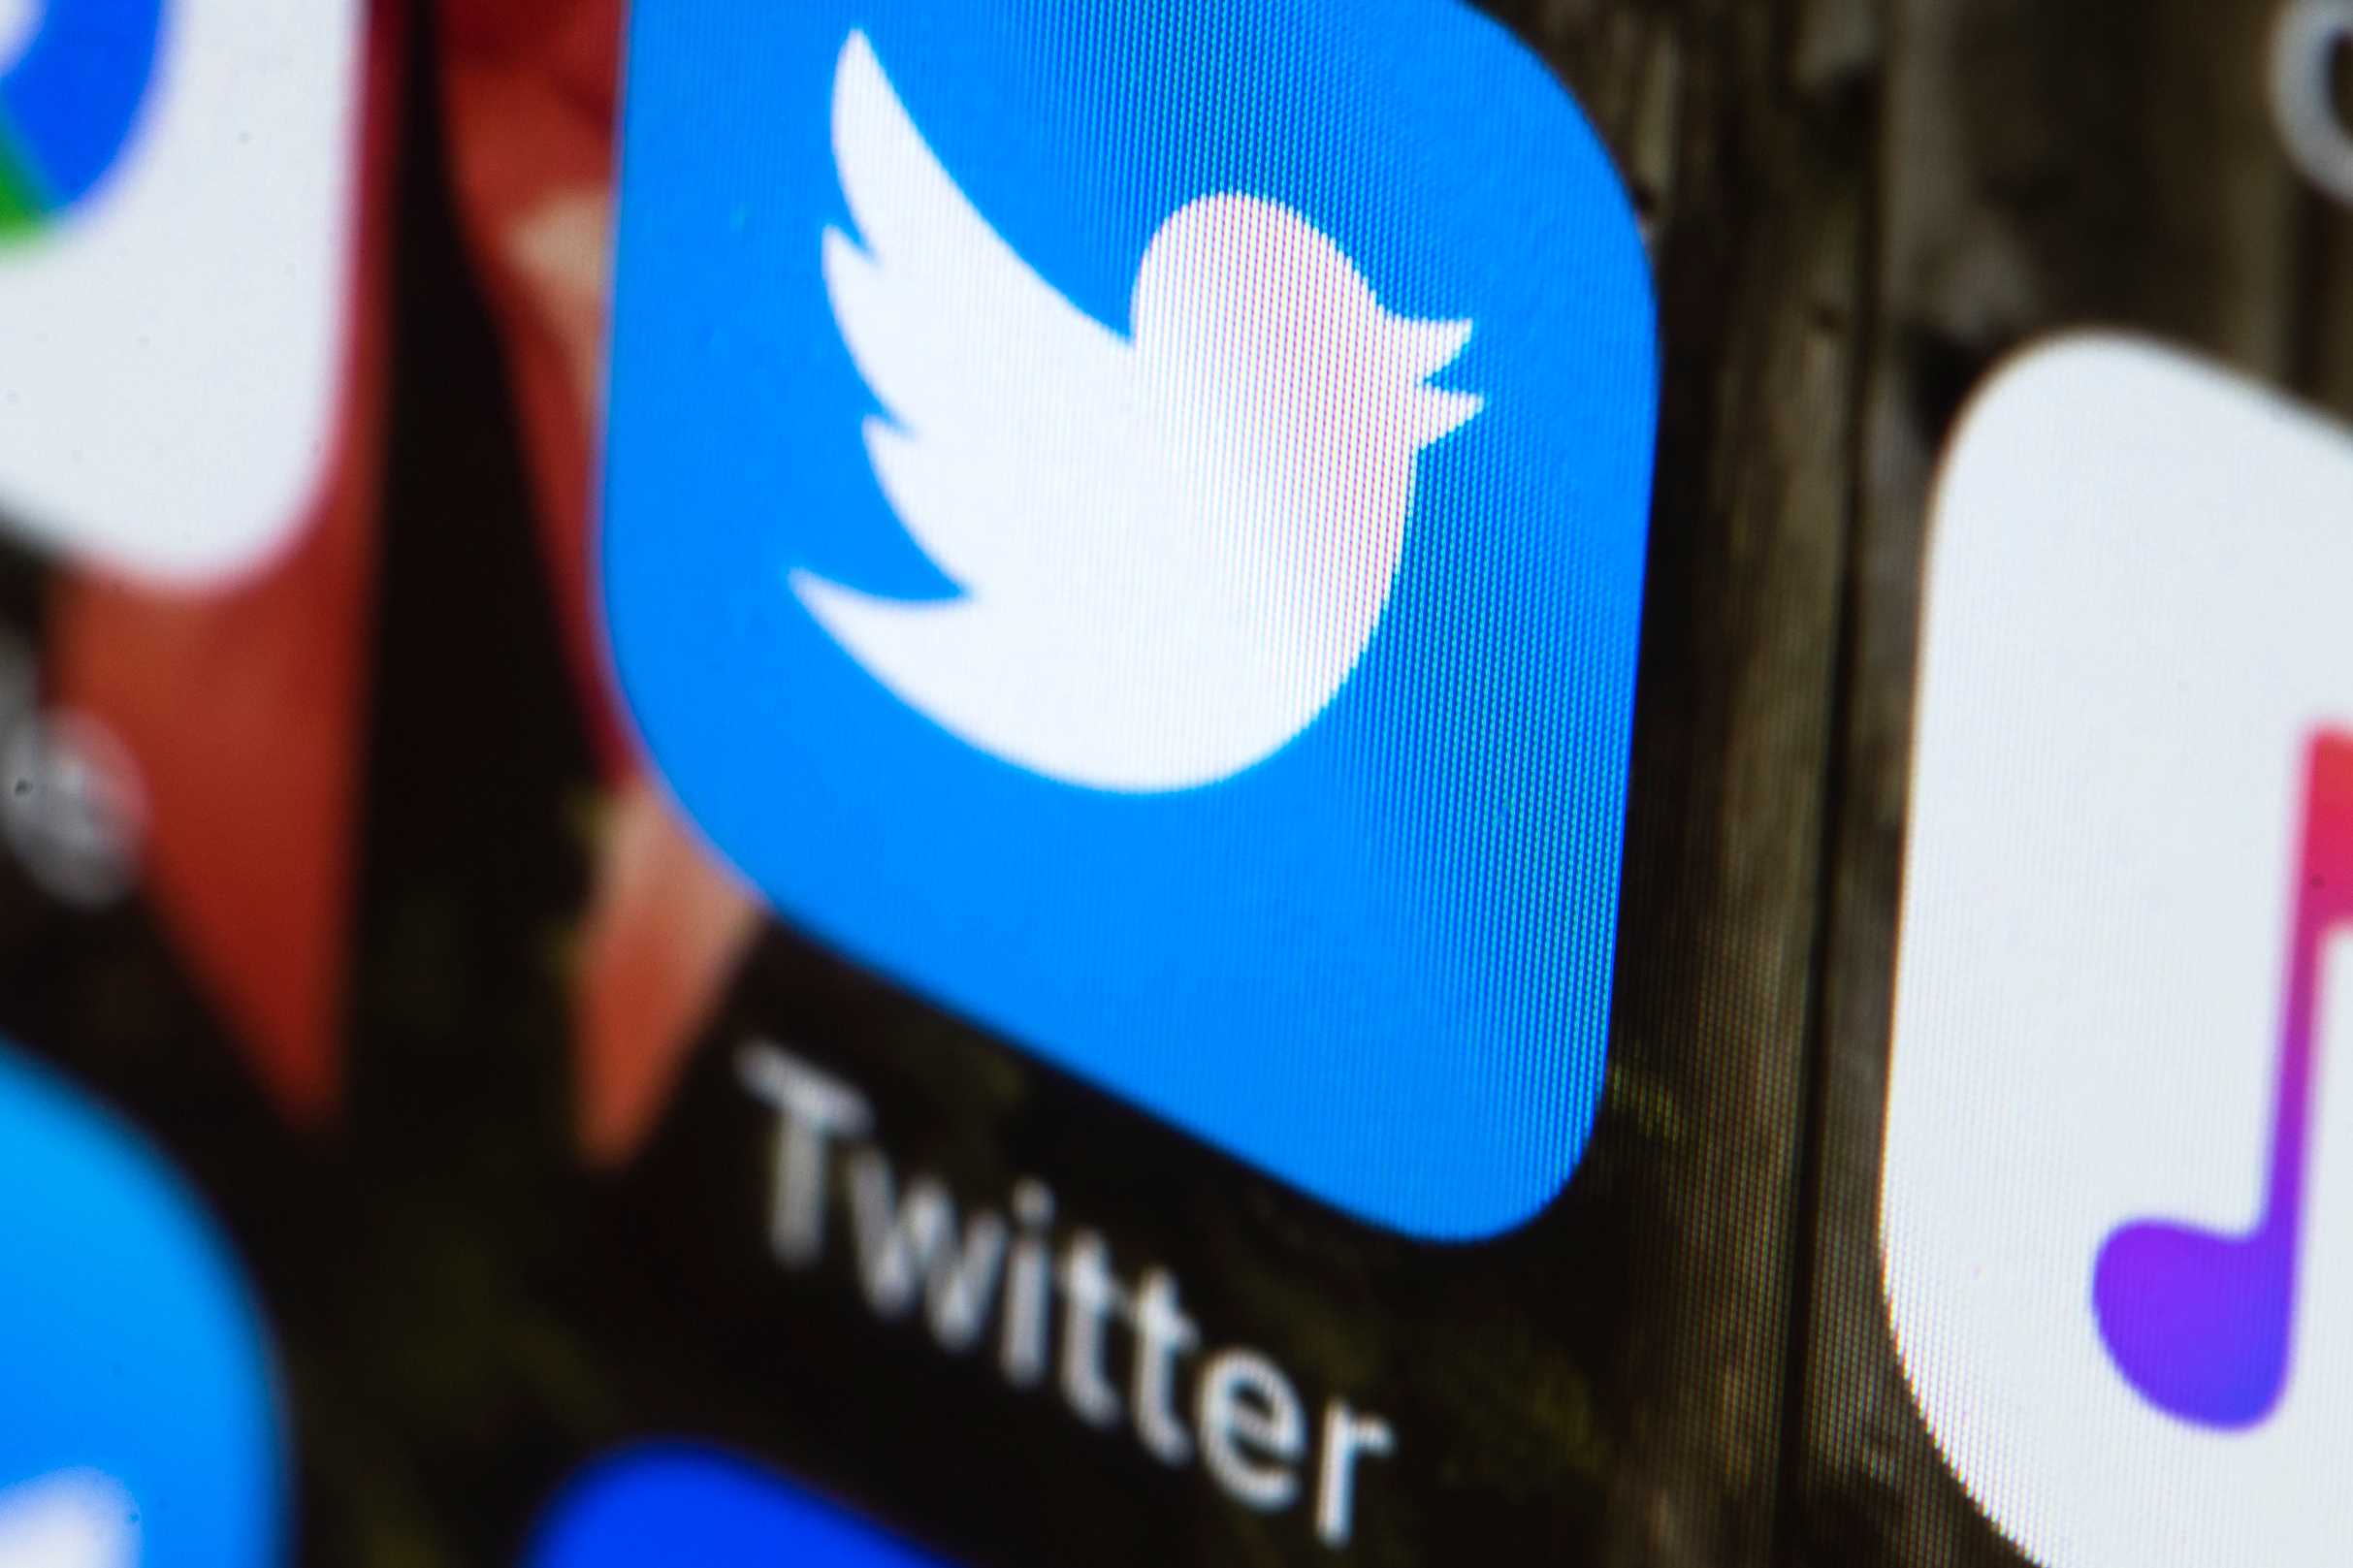 FILE - This April 26, 2017, file photo shows the Twitter app on a mobile phone in Philadelphia. Twitter will now prohibit hate speech that targets religious groups using dehumanizing language. AP Photo/Matt Rourke, File)